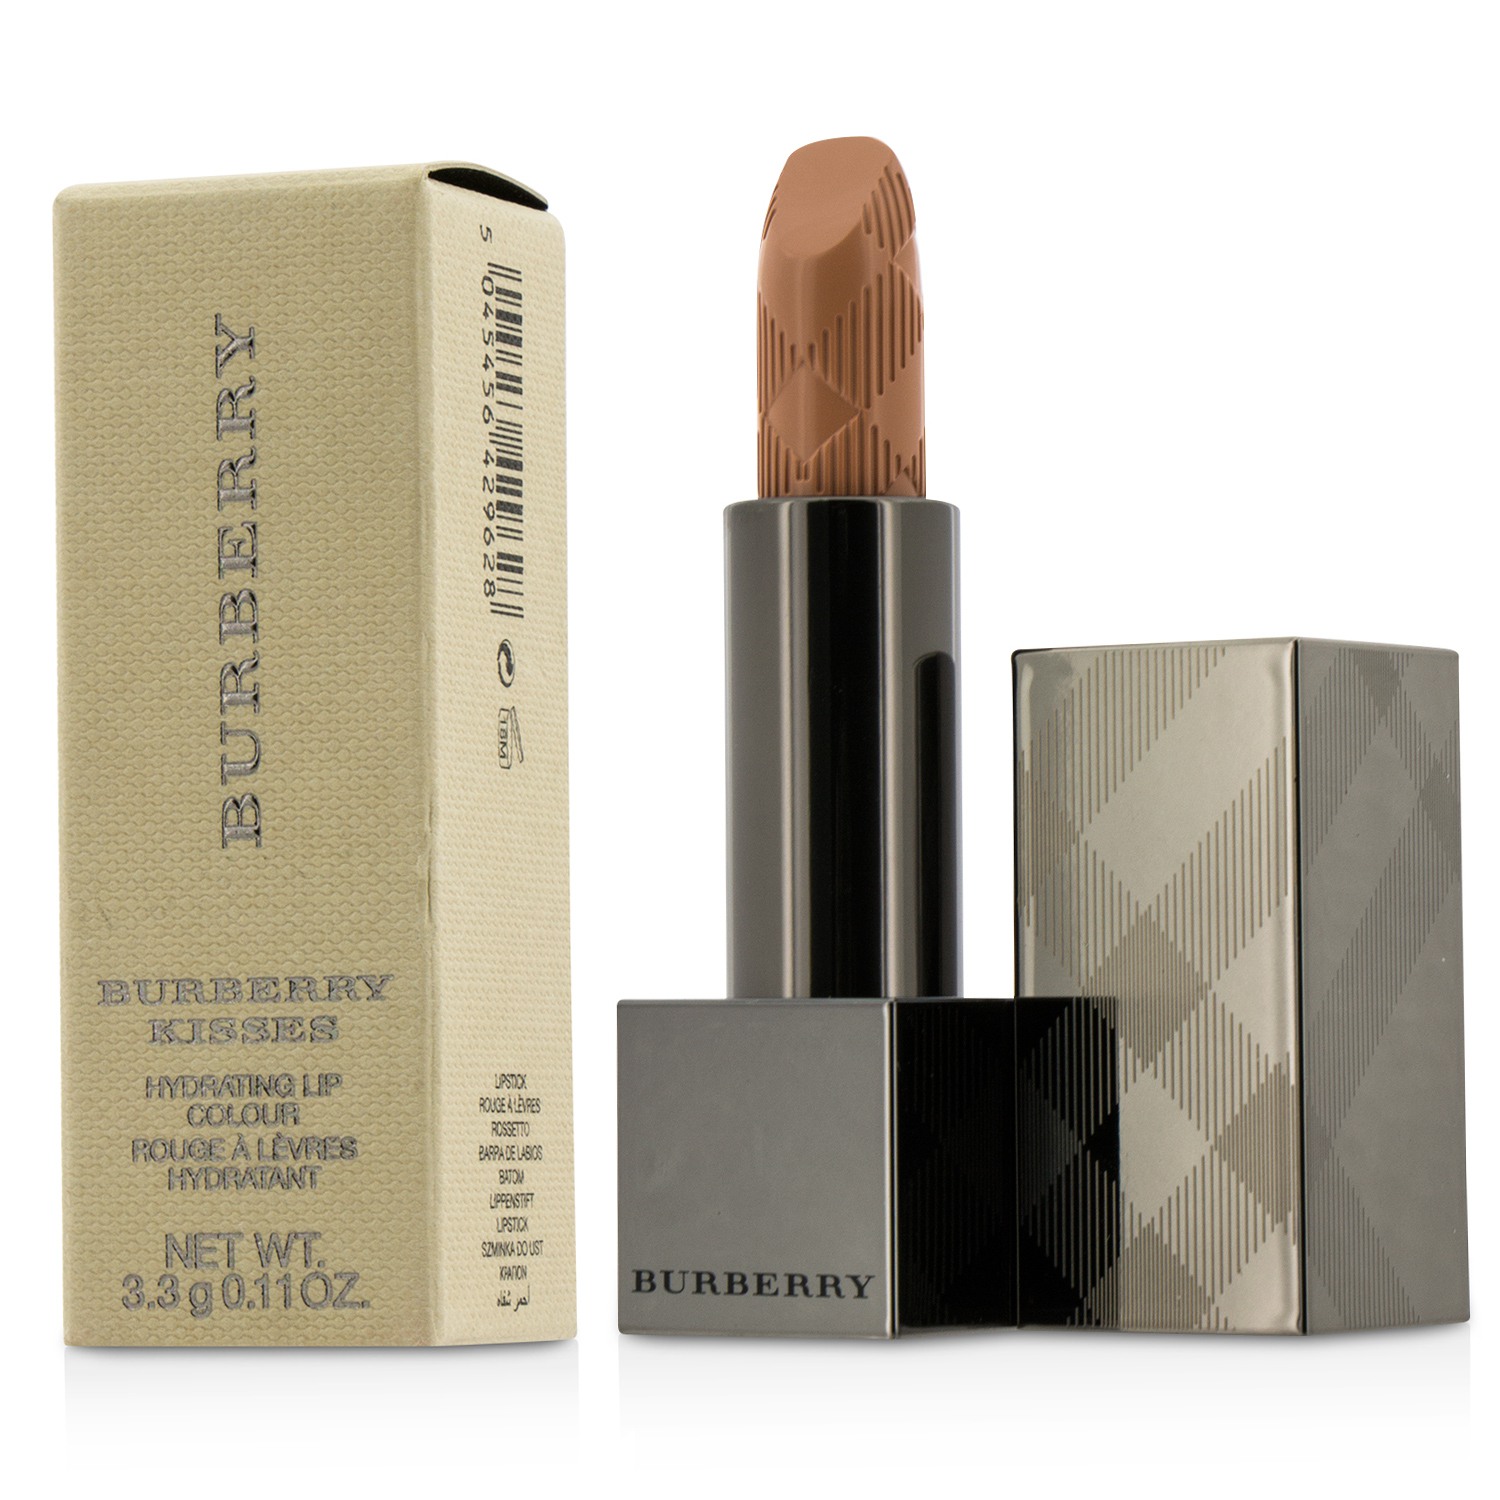 Burberry Kisses Hydrating Lip Colour - # No. 01 Nude Beige Burberry Image